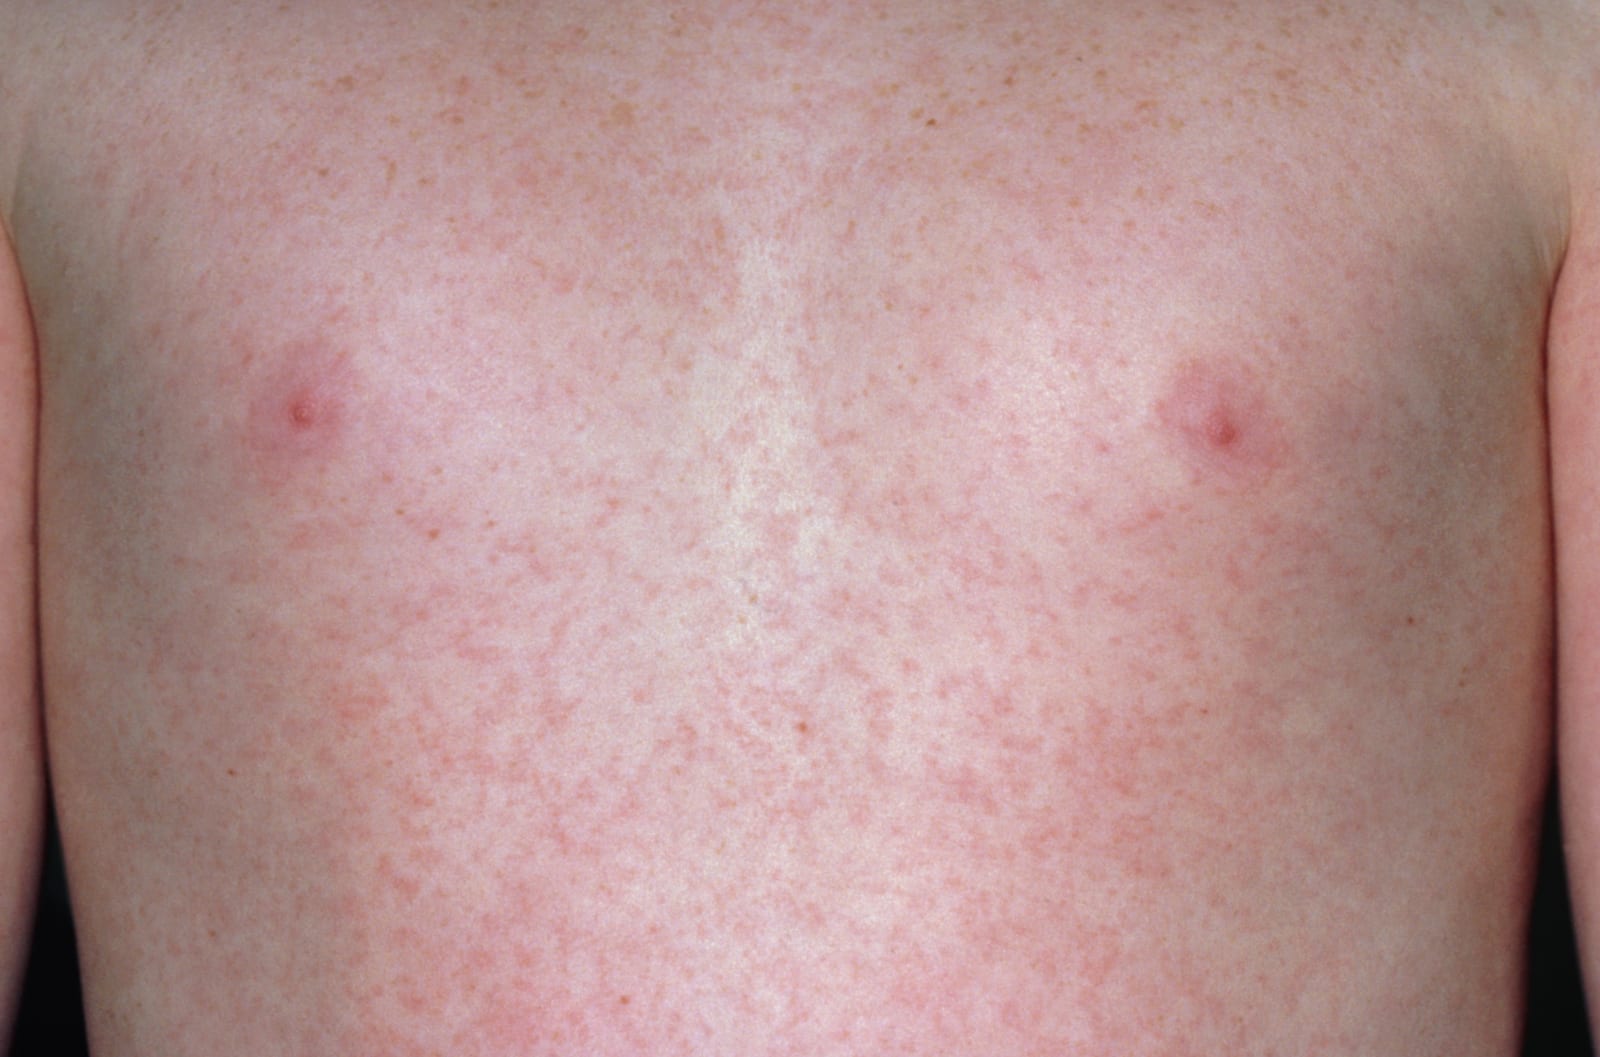 German measles (Rubella) rash on chest of a child